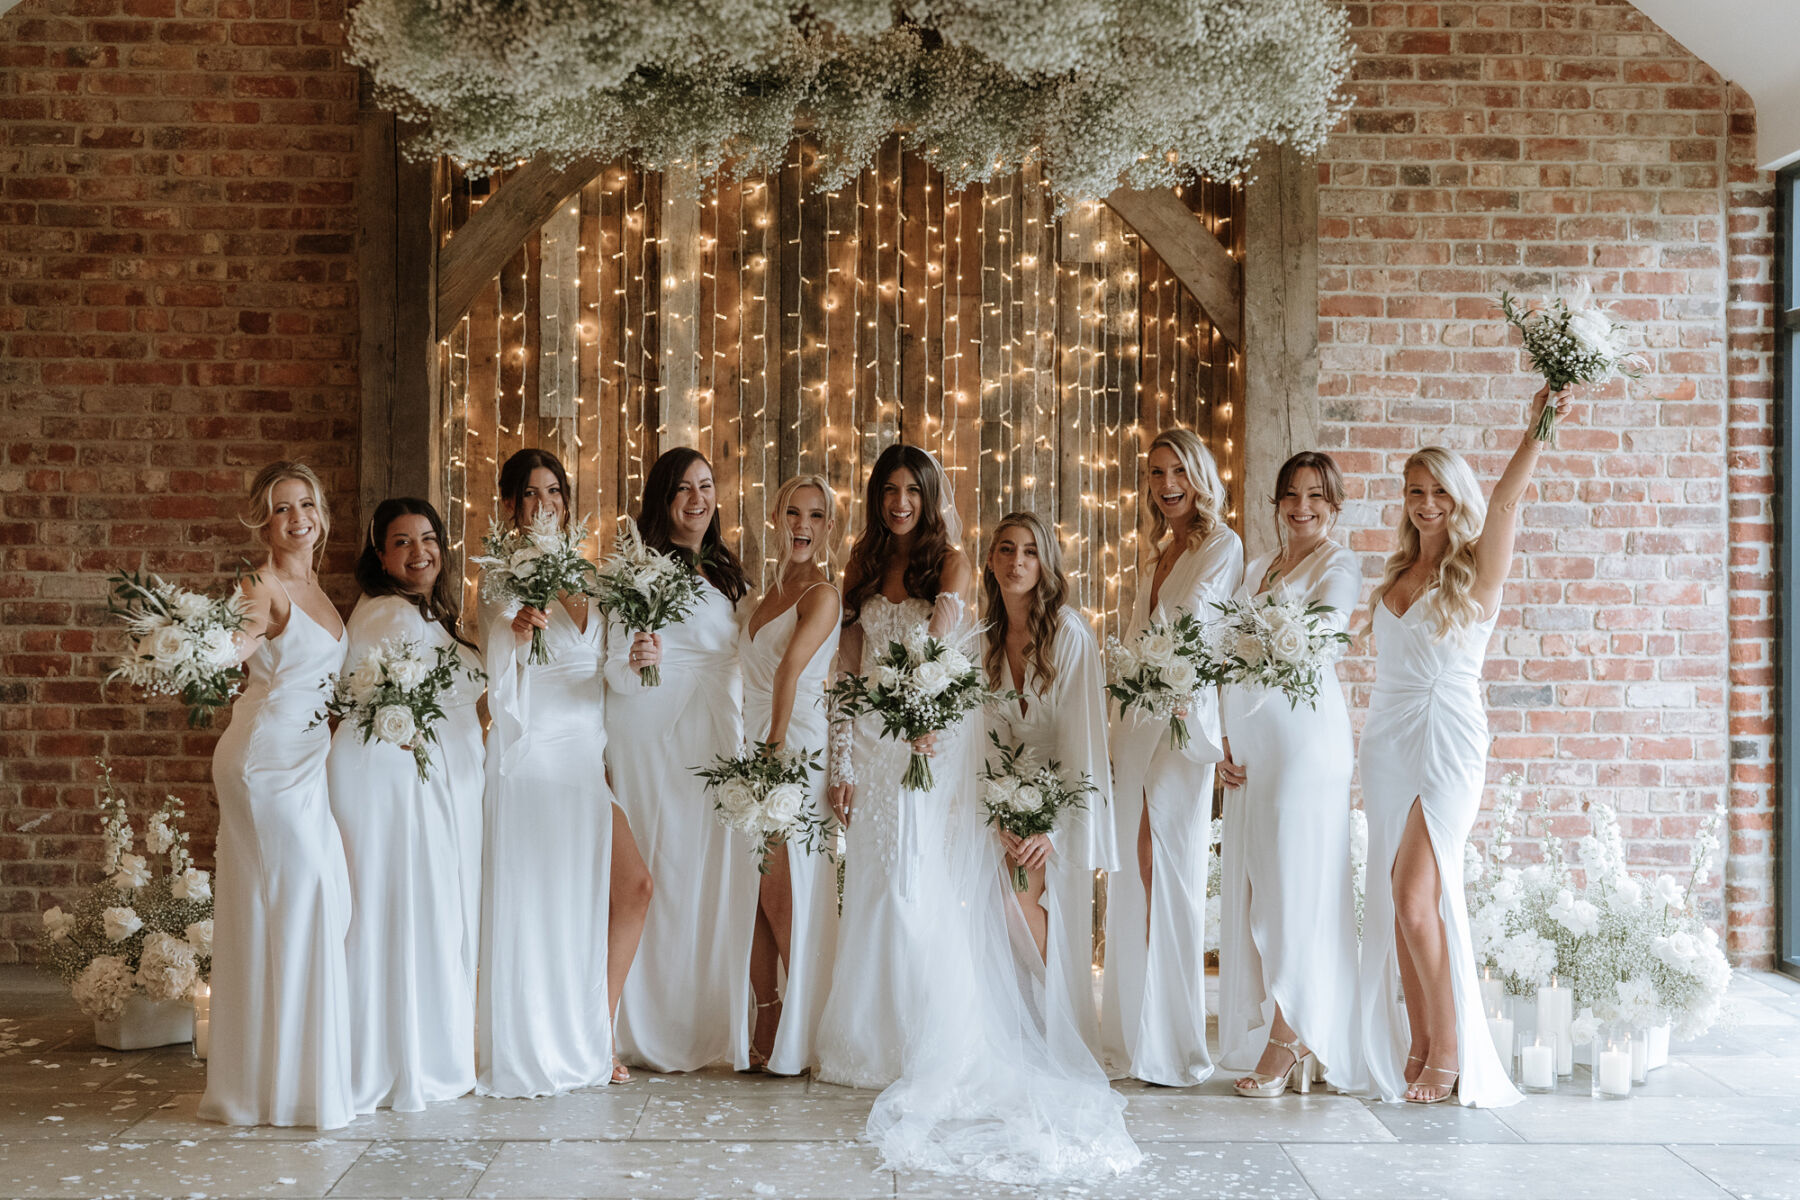 Thirsk Lodge Barns - brides with her bridesmaids dressed all in white with a fairylights backdrop at this North Yorkshire wedding venue